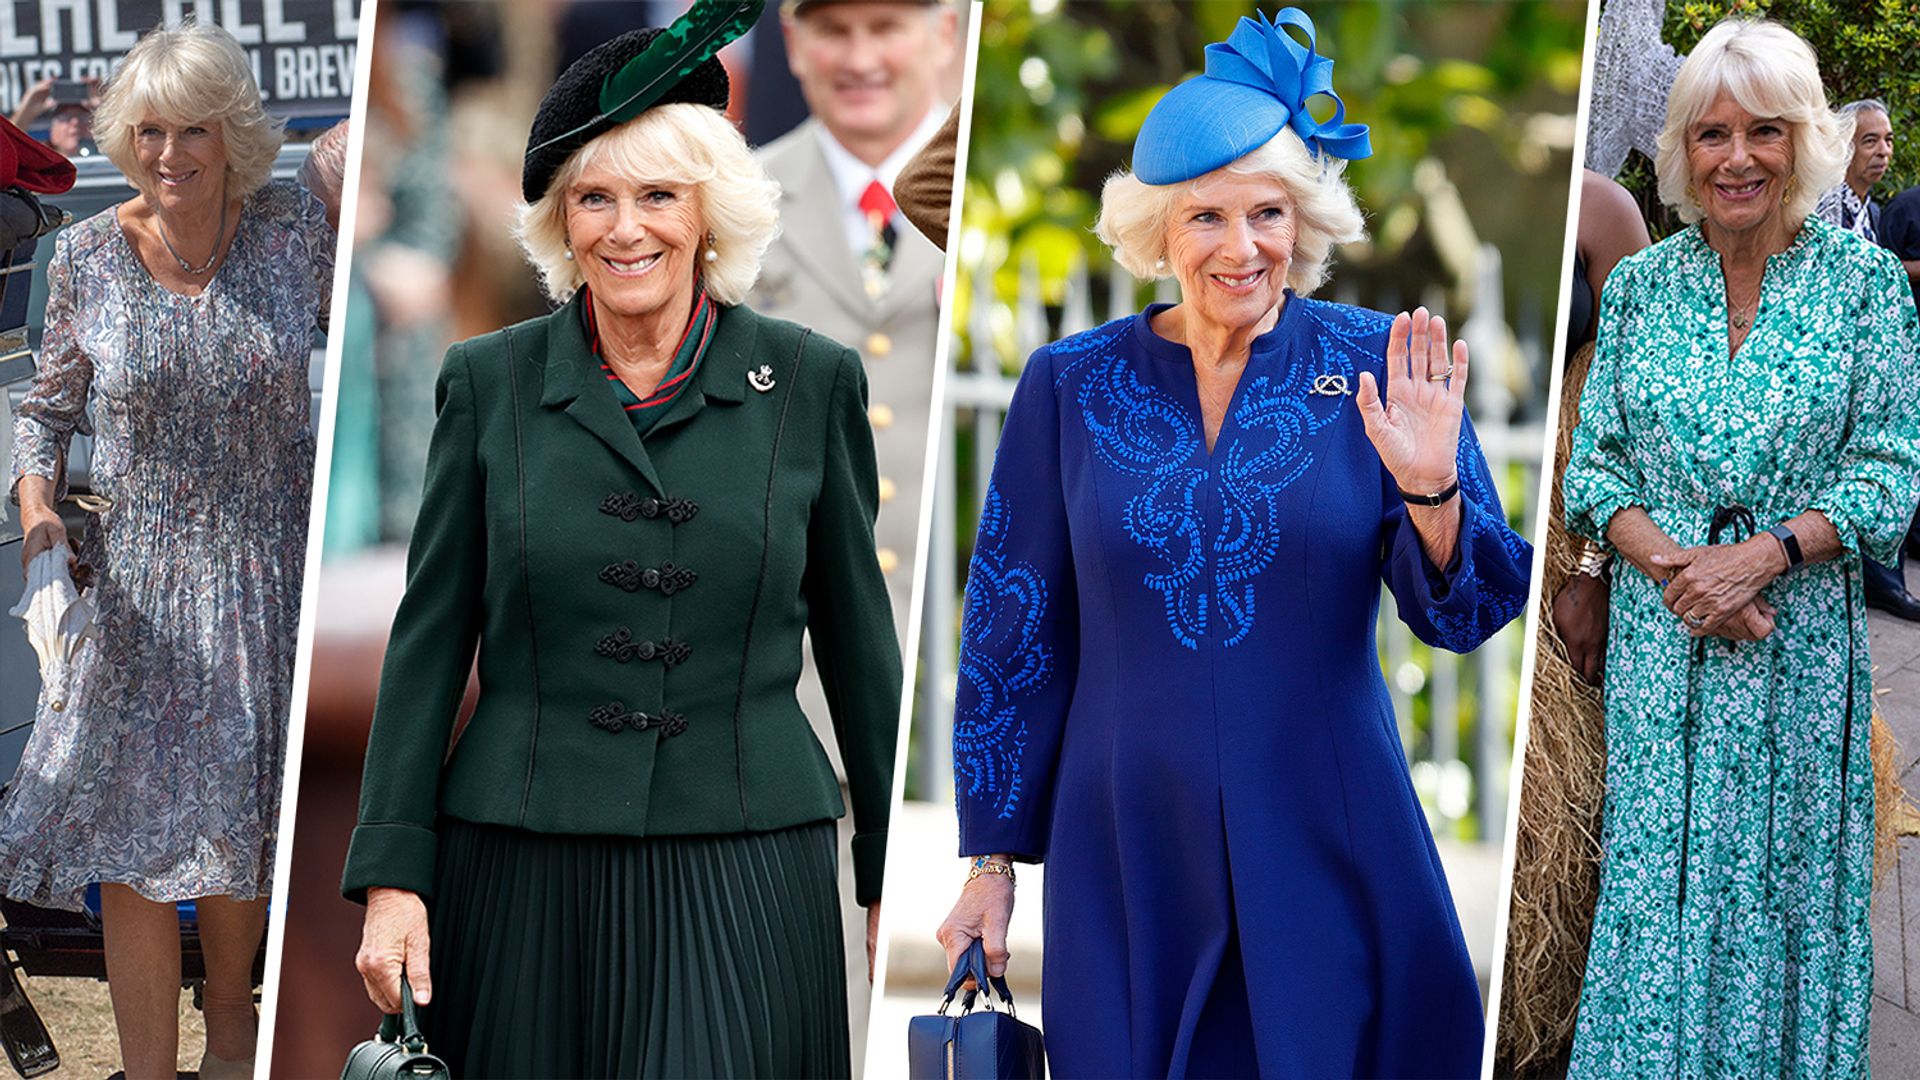 The Duchess of Cornwall: 'I have a profound sense of being at home